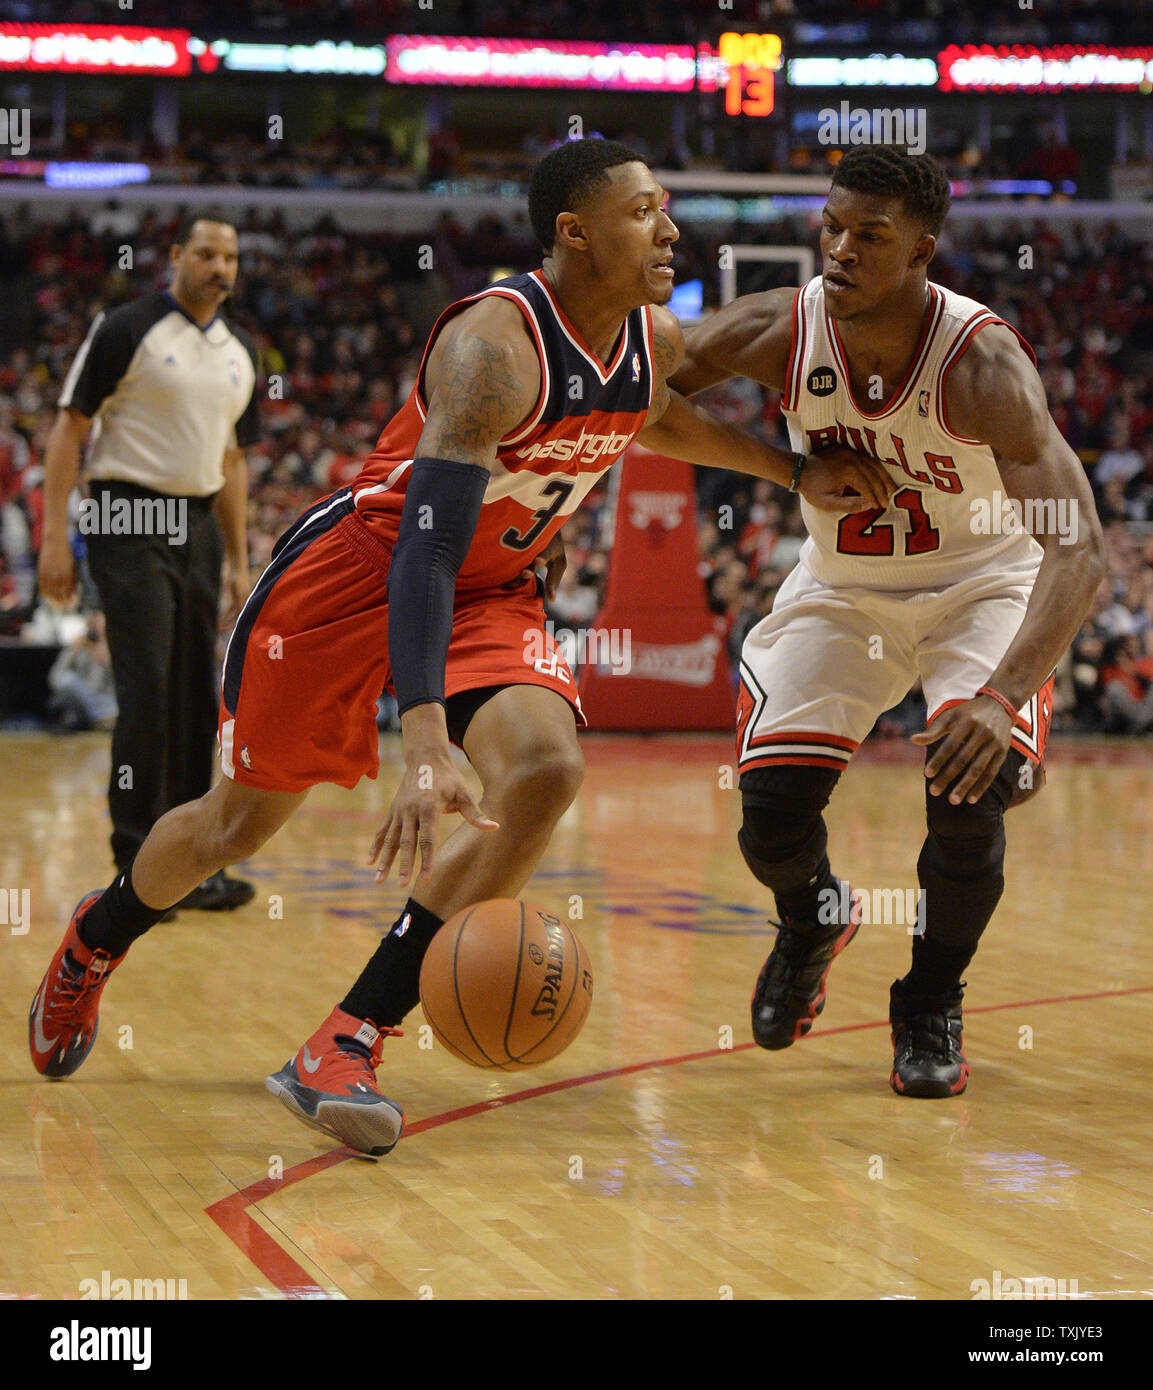 Washington Wizards guard Bradley Beal (L) drives on Chicago Bulls guard Jimmy Butler during the third quarter of Game 2 of the NBA Eastern Conference quarterfinals at the United Center on April 22, 2014 in Chicago. The Wizards defeated the Bulls 101-99 in overtime and lead the best of seven series 2-0.     UPI/Brian Kersey Stock Photo